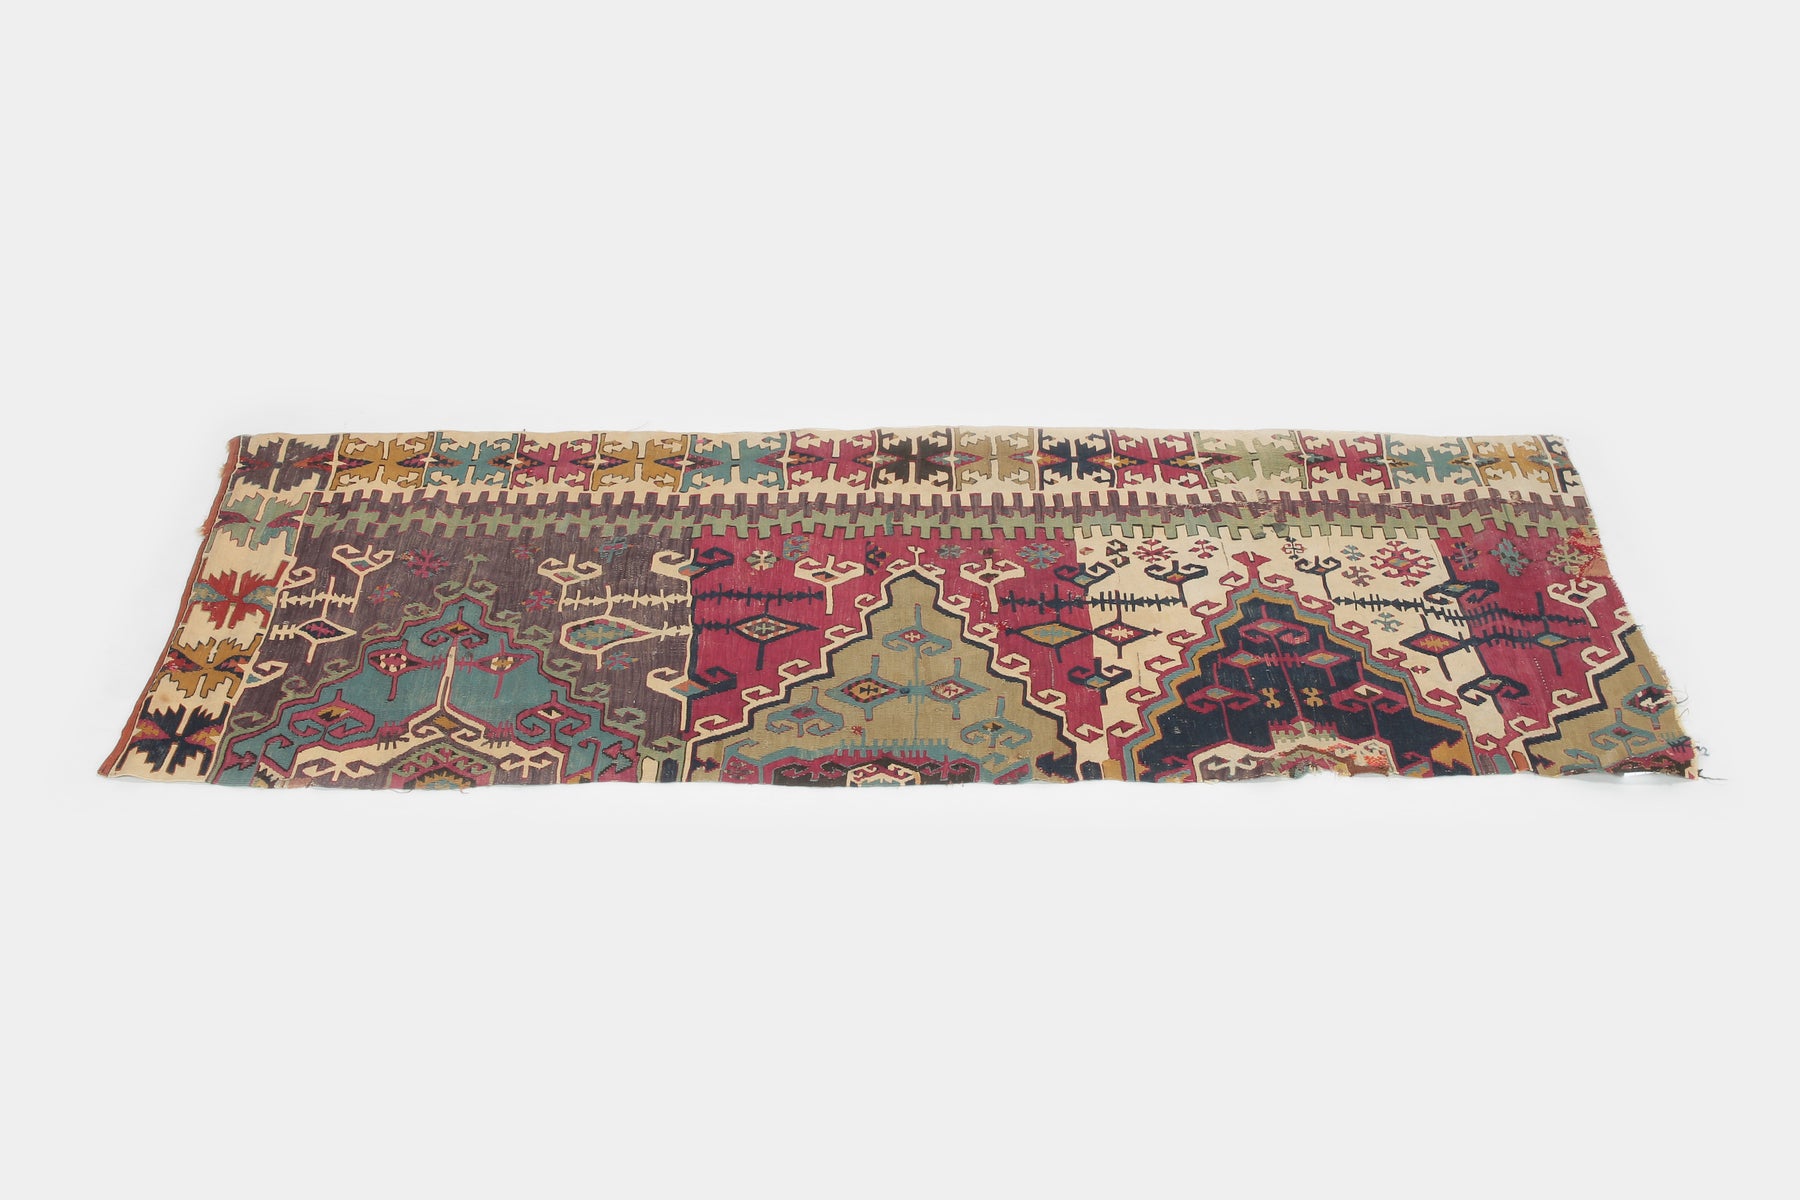 Antique kilim from Turkey, collector’s item